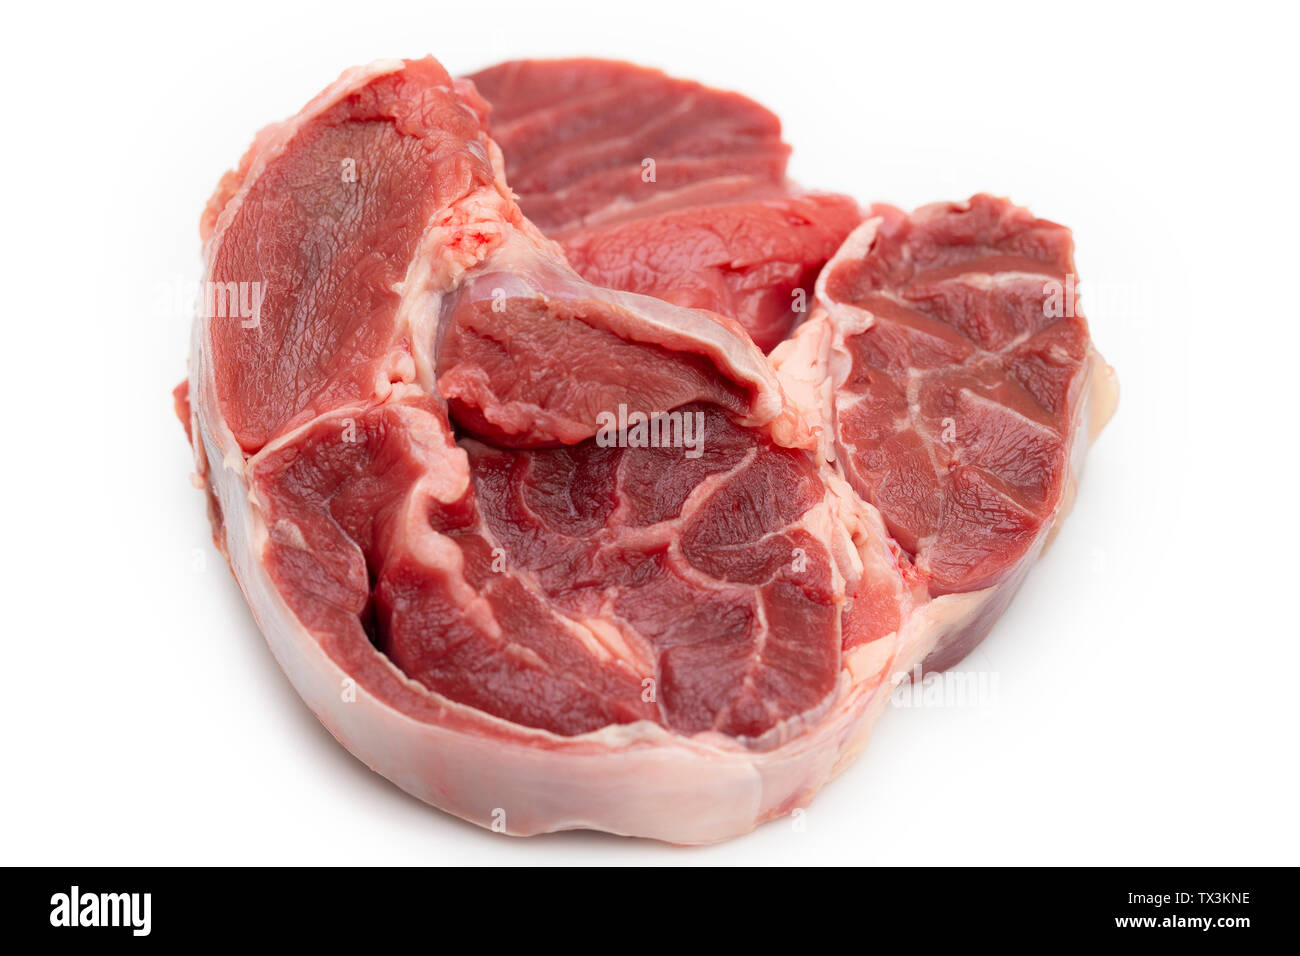 Raw boneless beef shank for slow-cooking or pressure cooking Stock Photo